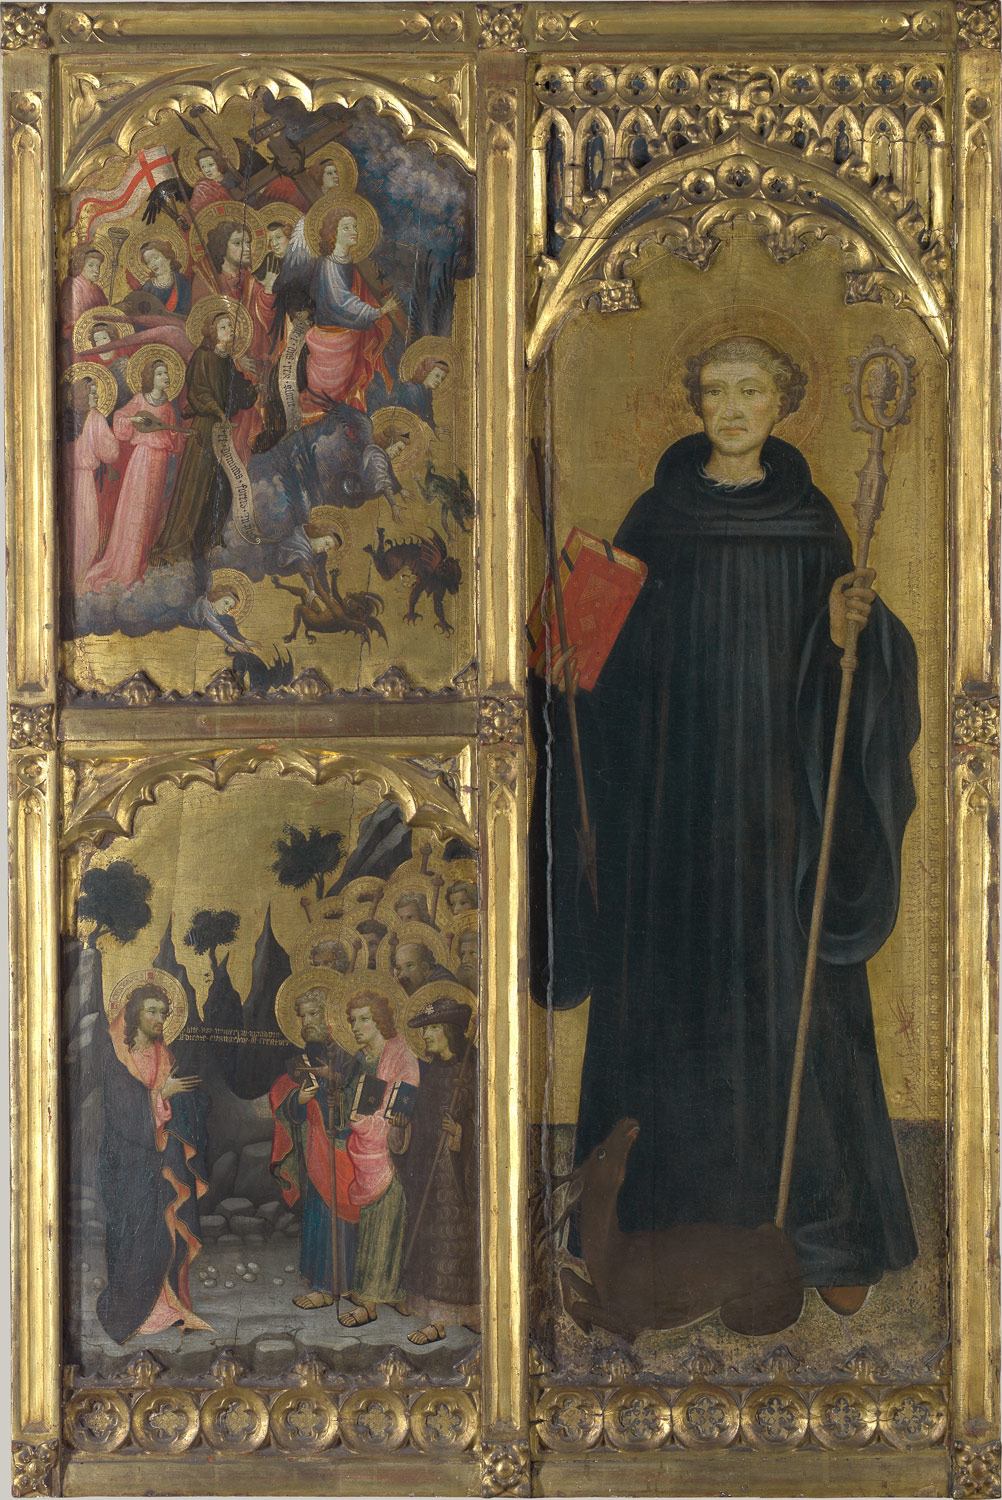 Saint Giles with Christ Triumphant over Satan and the Mission of the Apostles